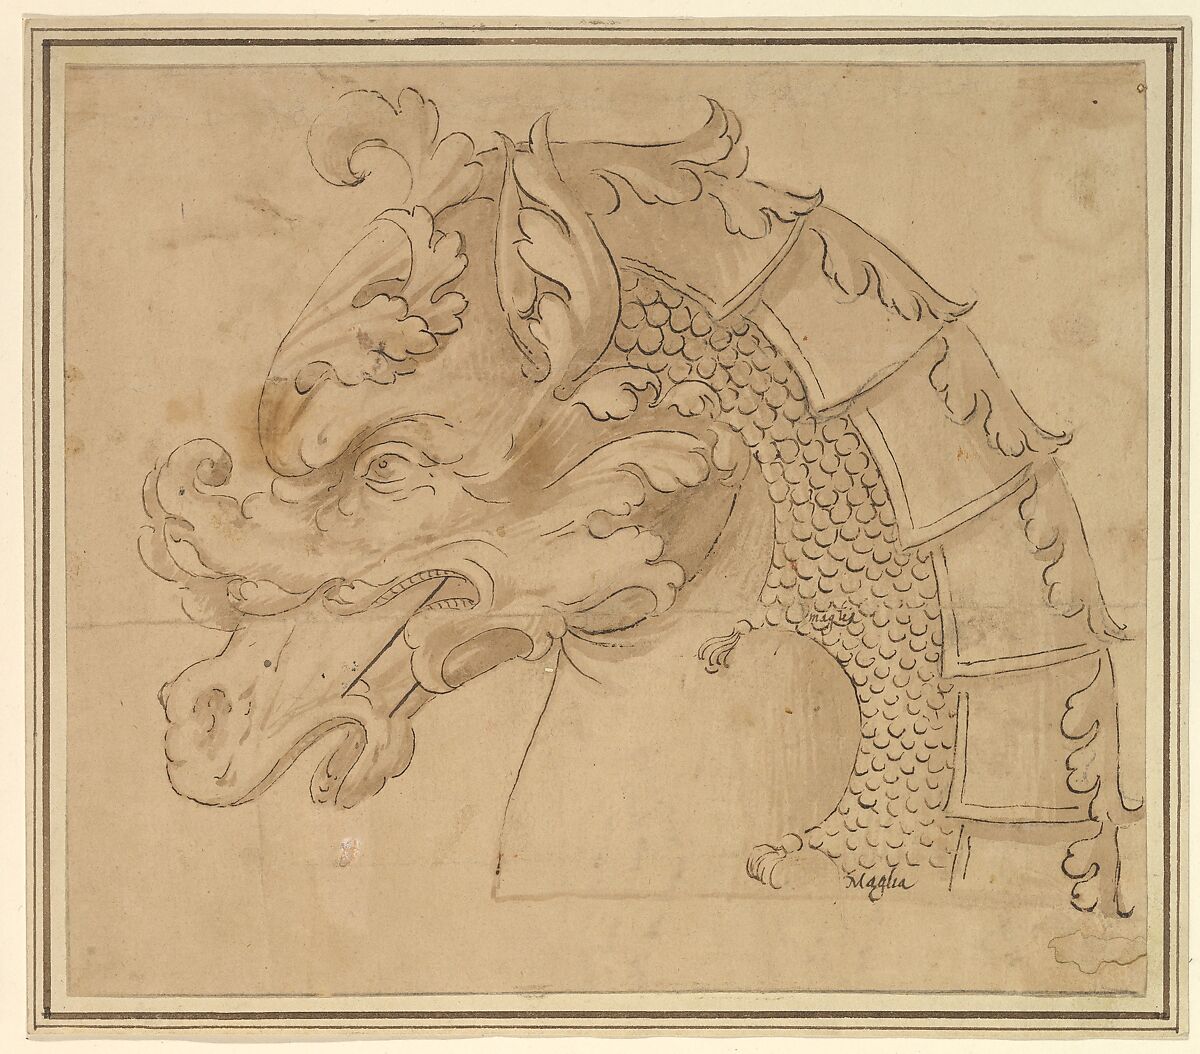 Armor Design for a Horse, Anonymous, Italian, 17th century, Brown ink and a light brown wash, pasted onto two sheets of paper, one of support and one as a mount, placed in a modern scrapbook 